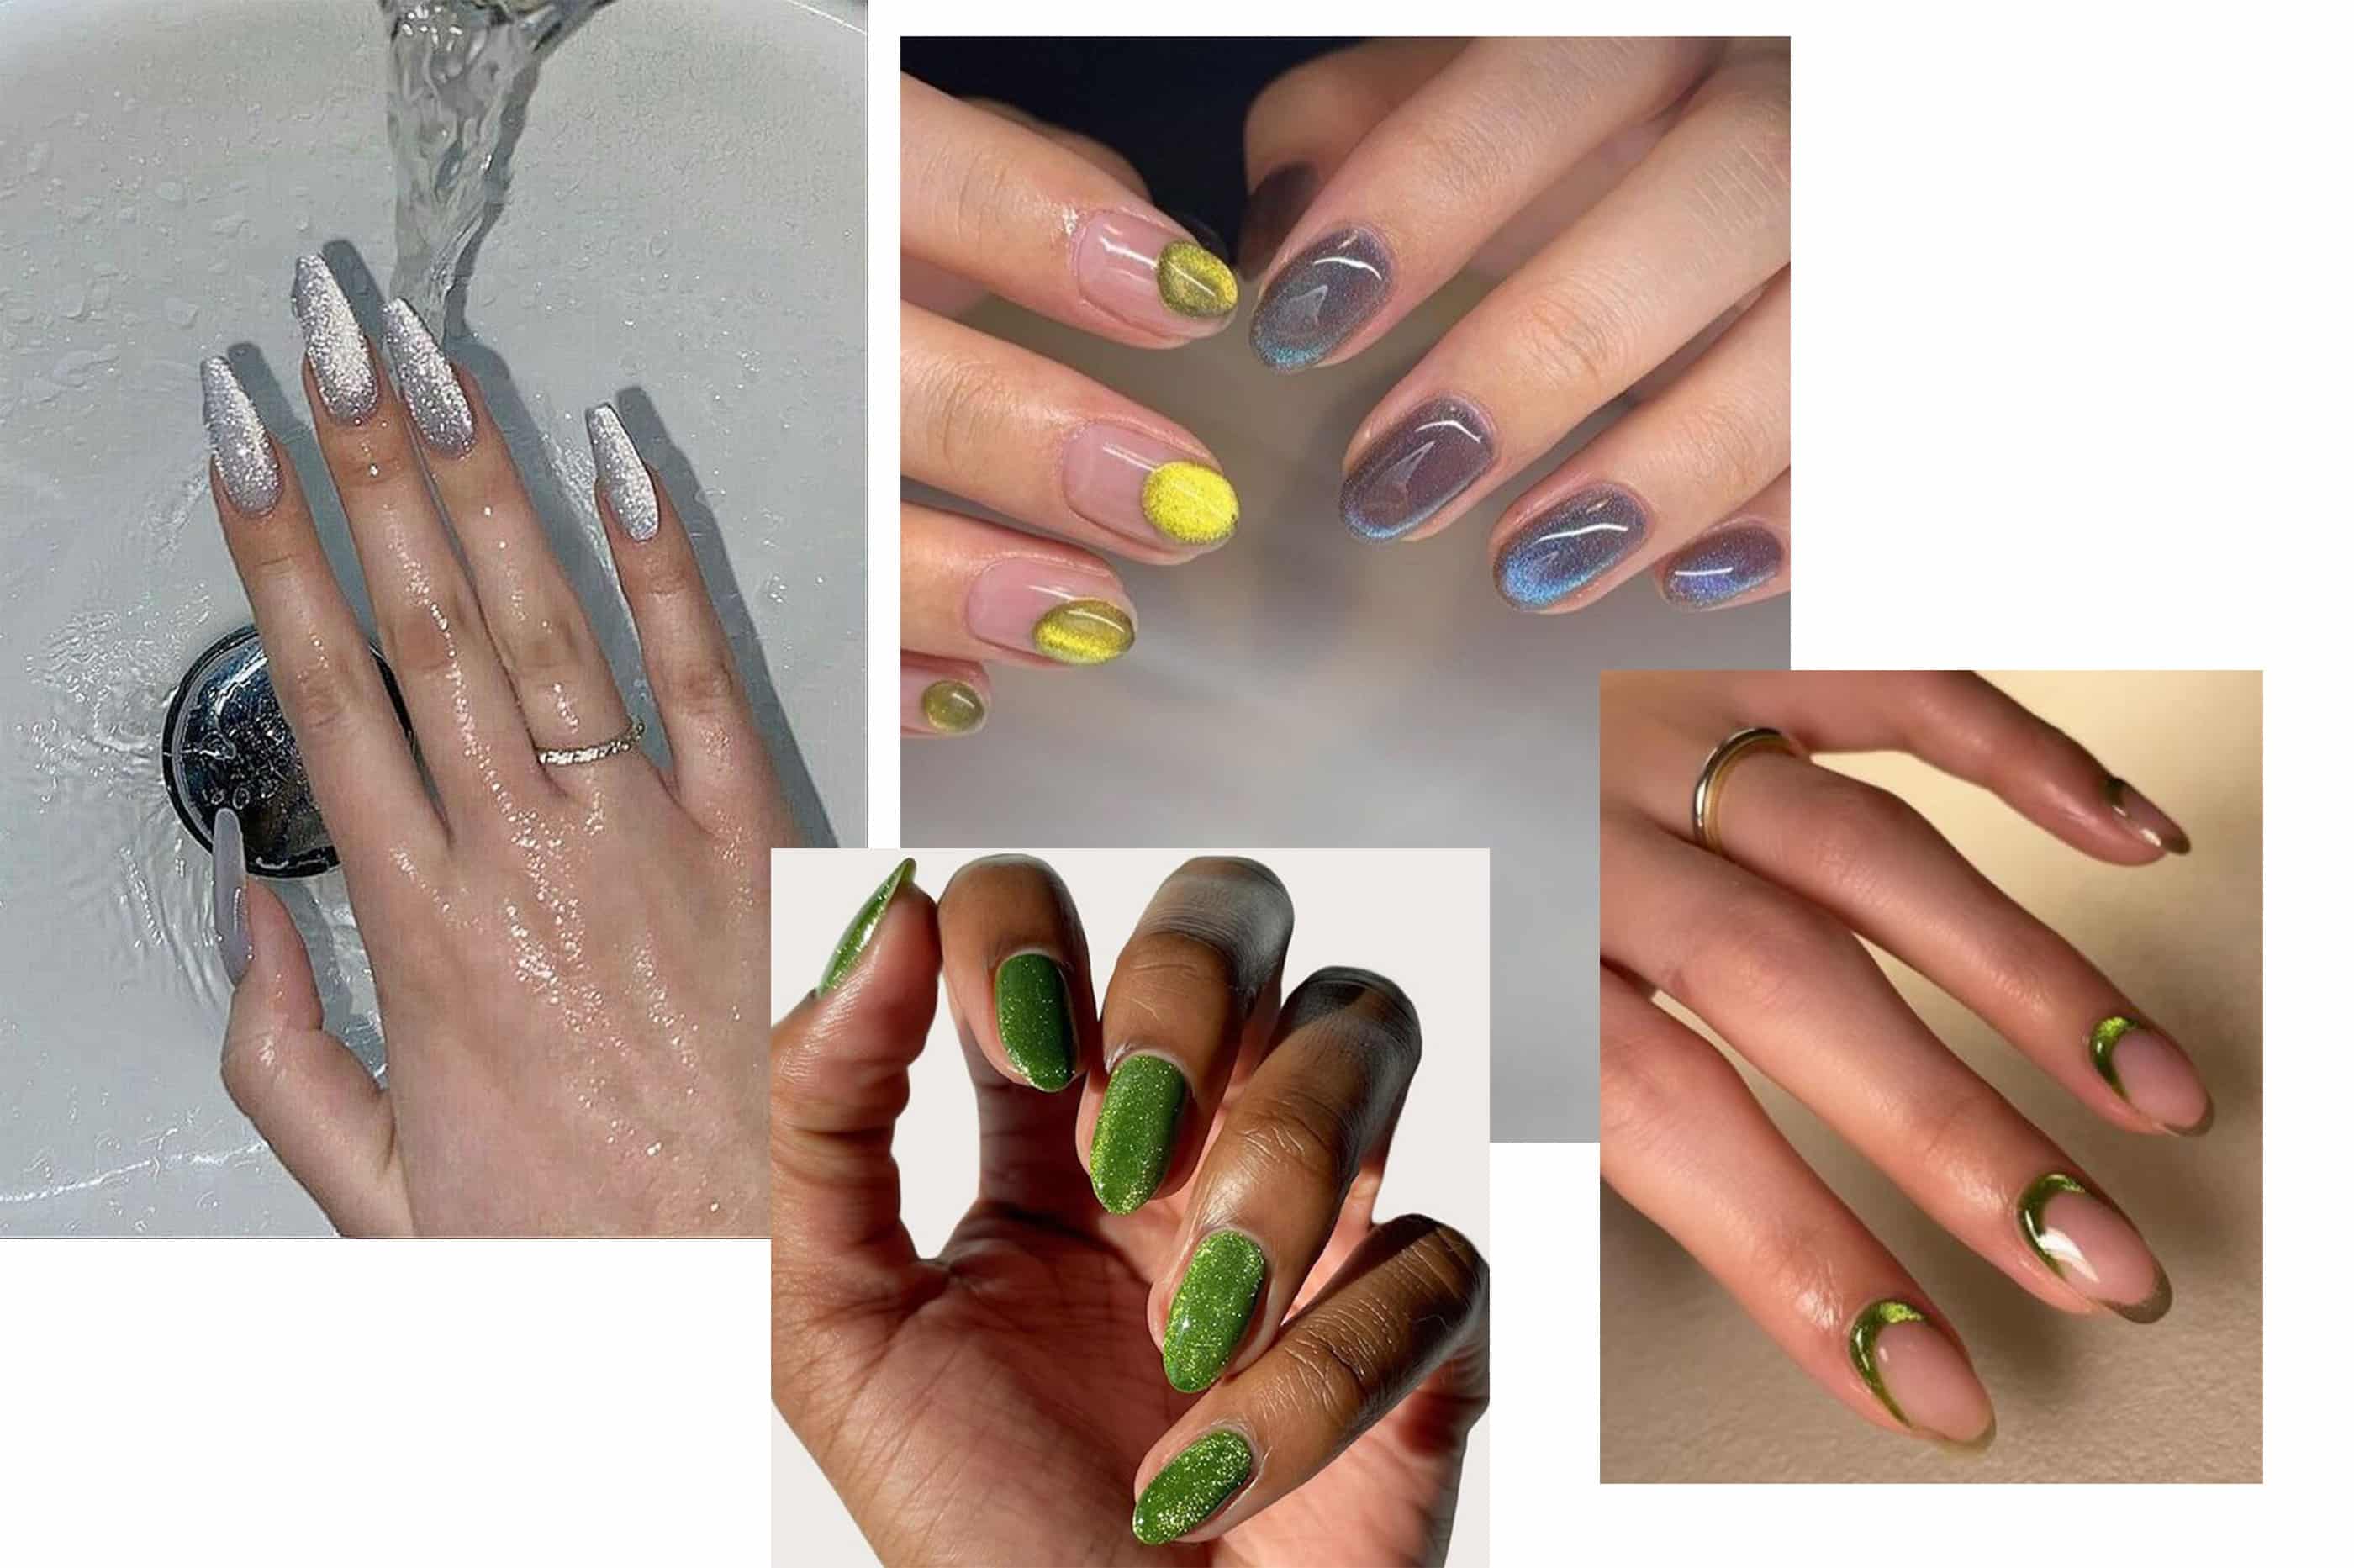 Love the velvet nail trend? Here's how to get a magnetic manicure